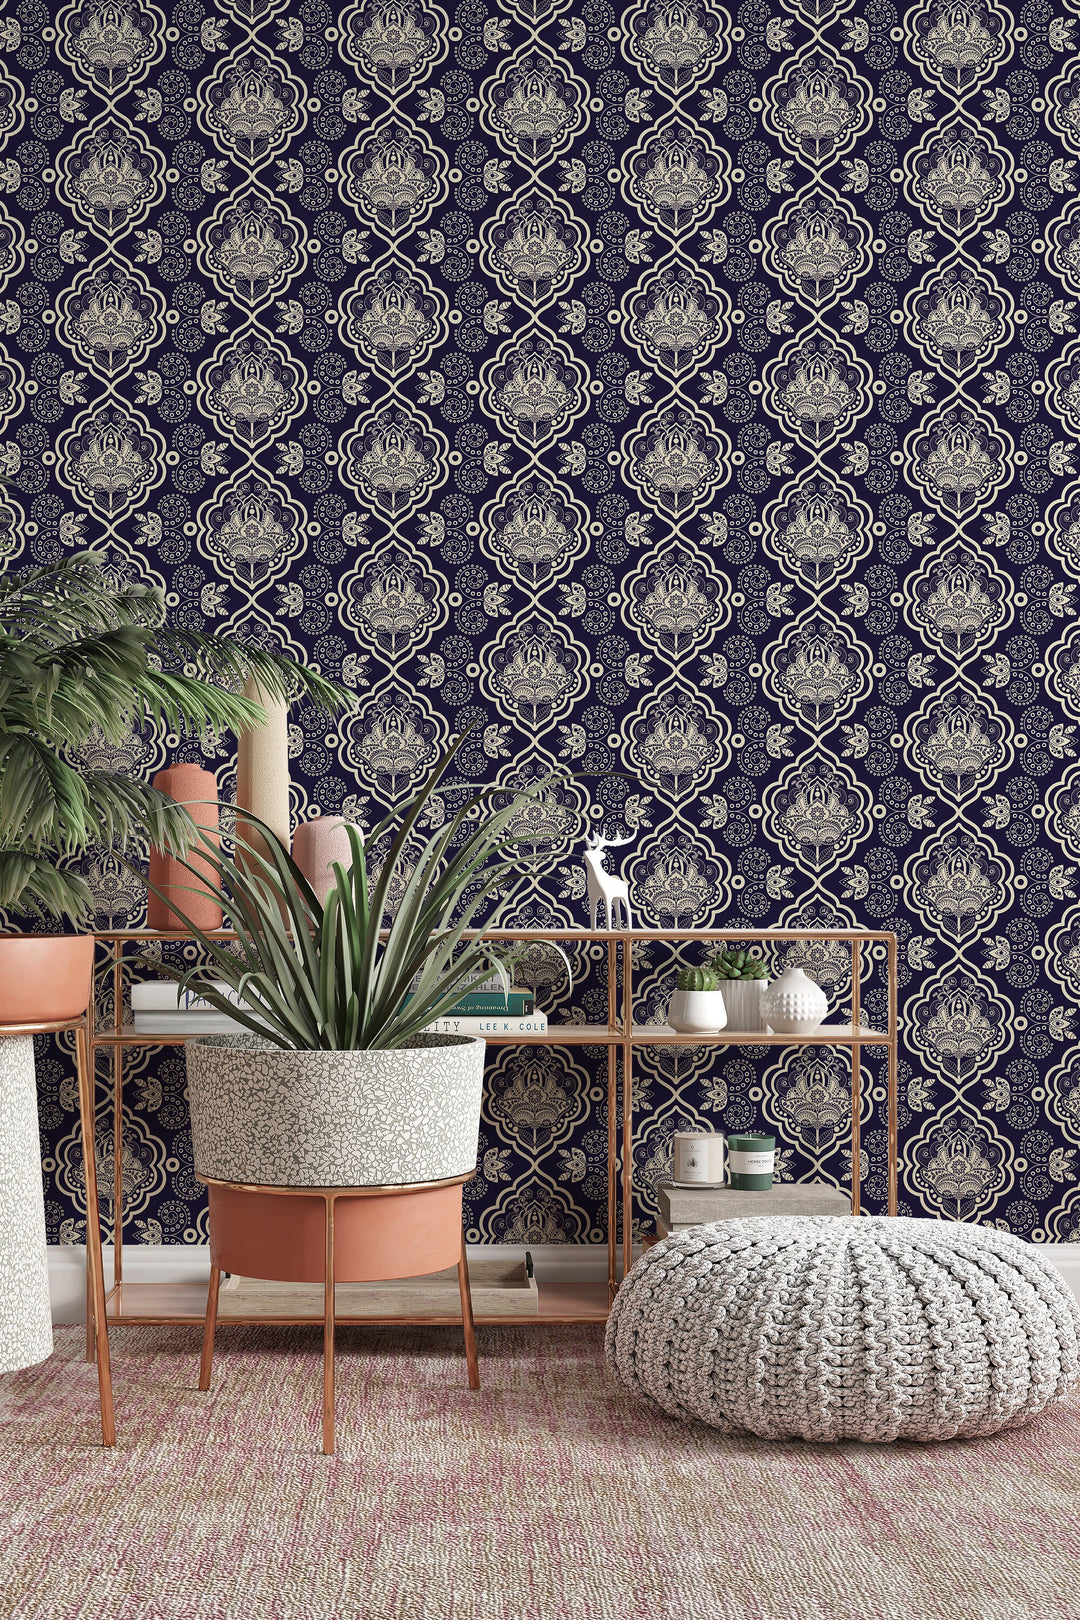 Indian pattern floral Self Adhesive Peel and Stick Wallpaper #3241